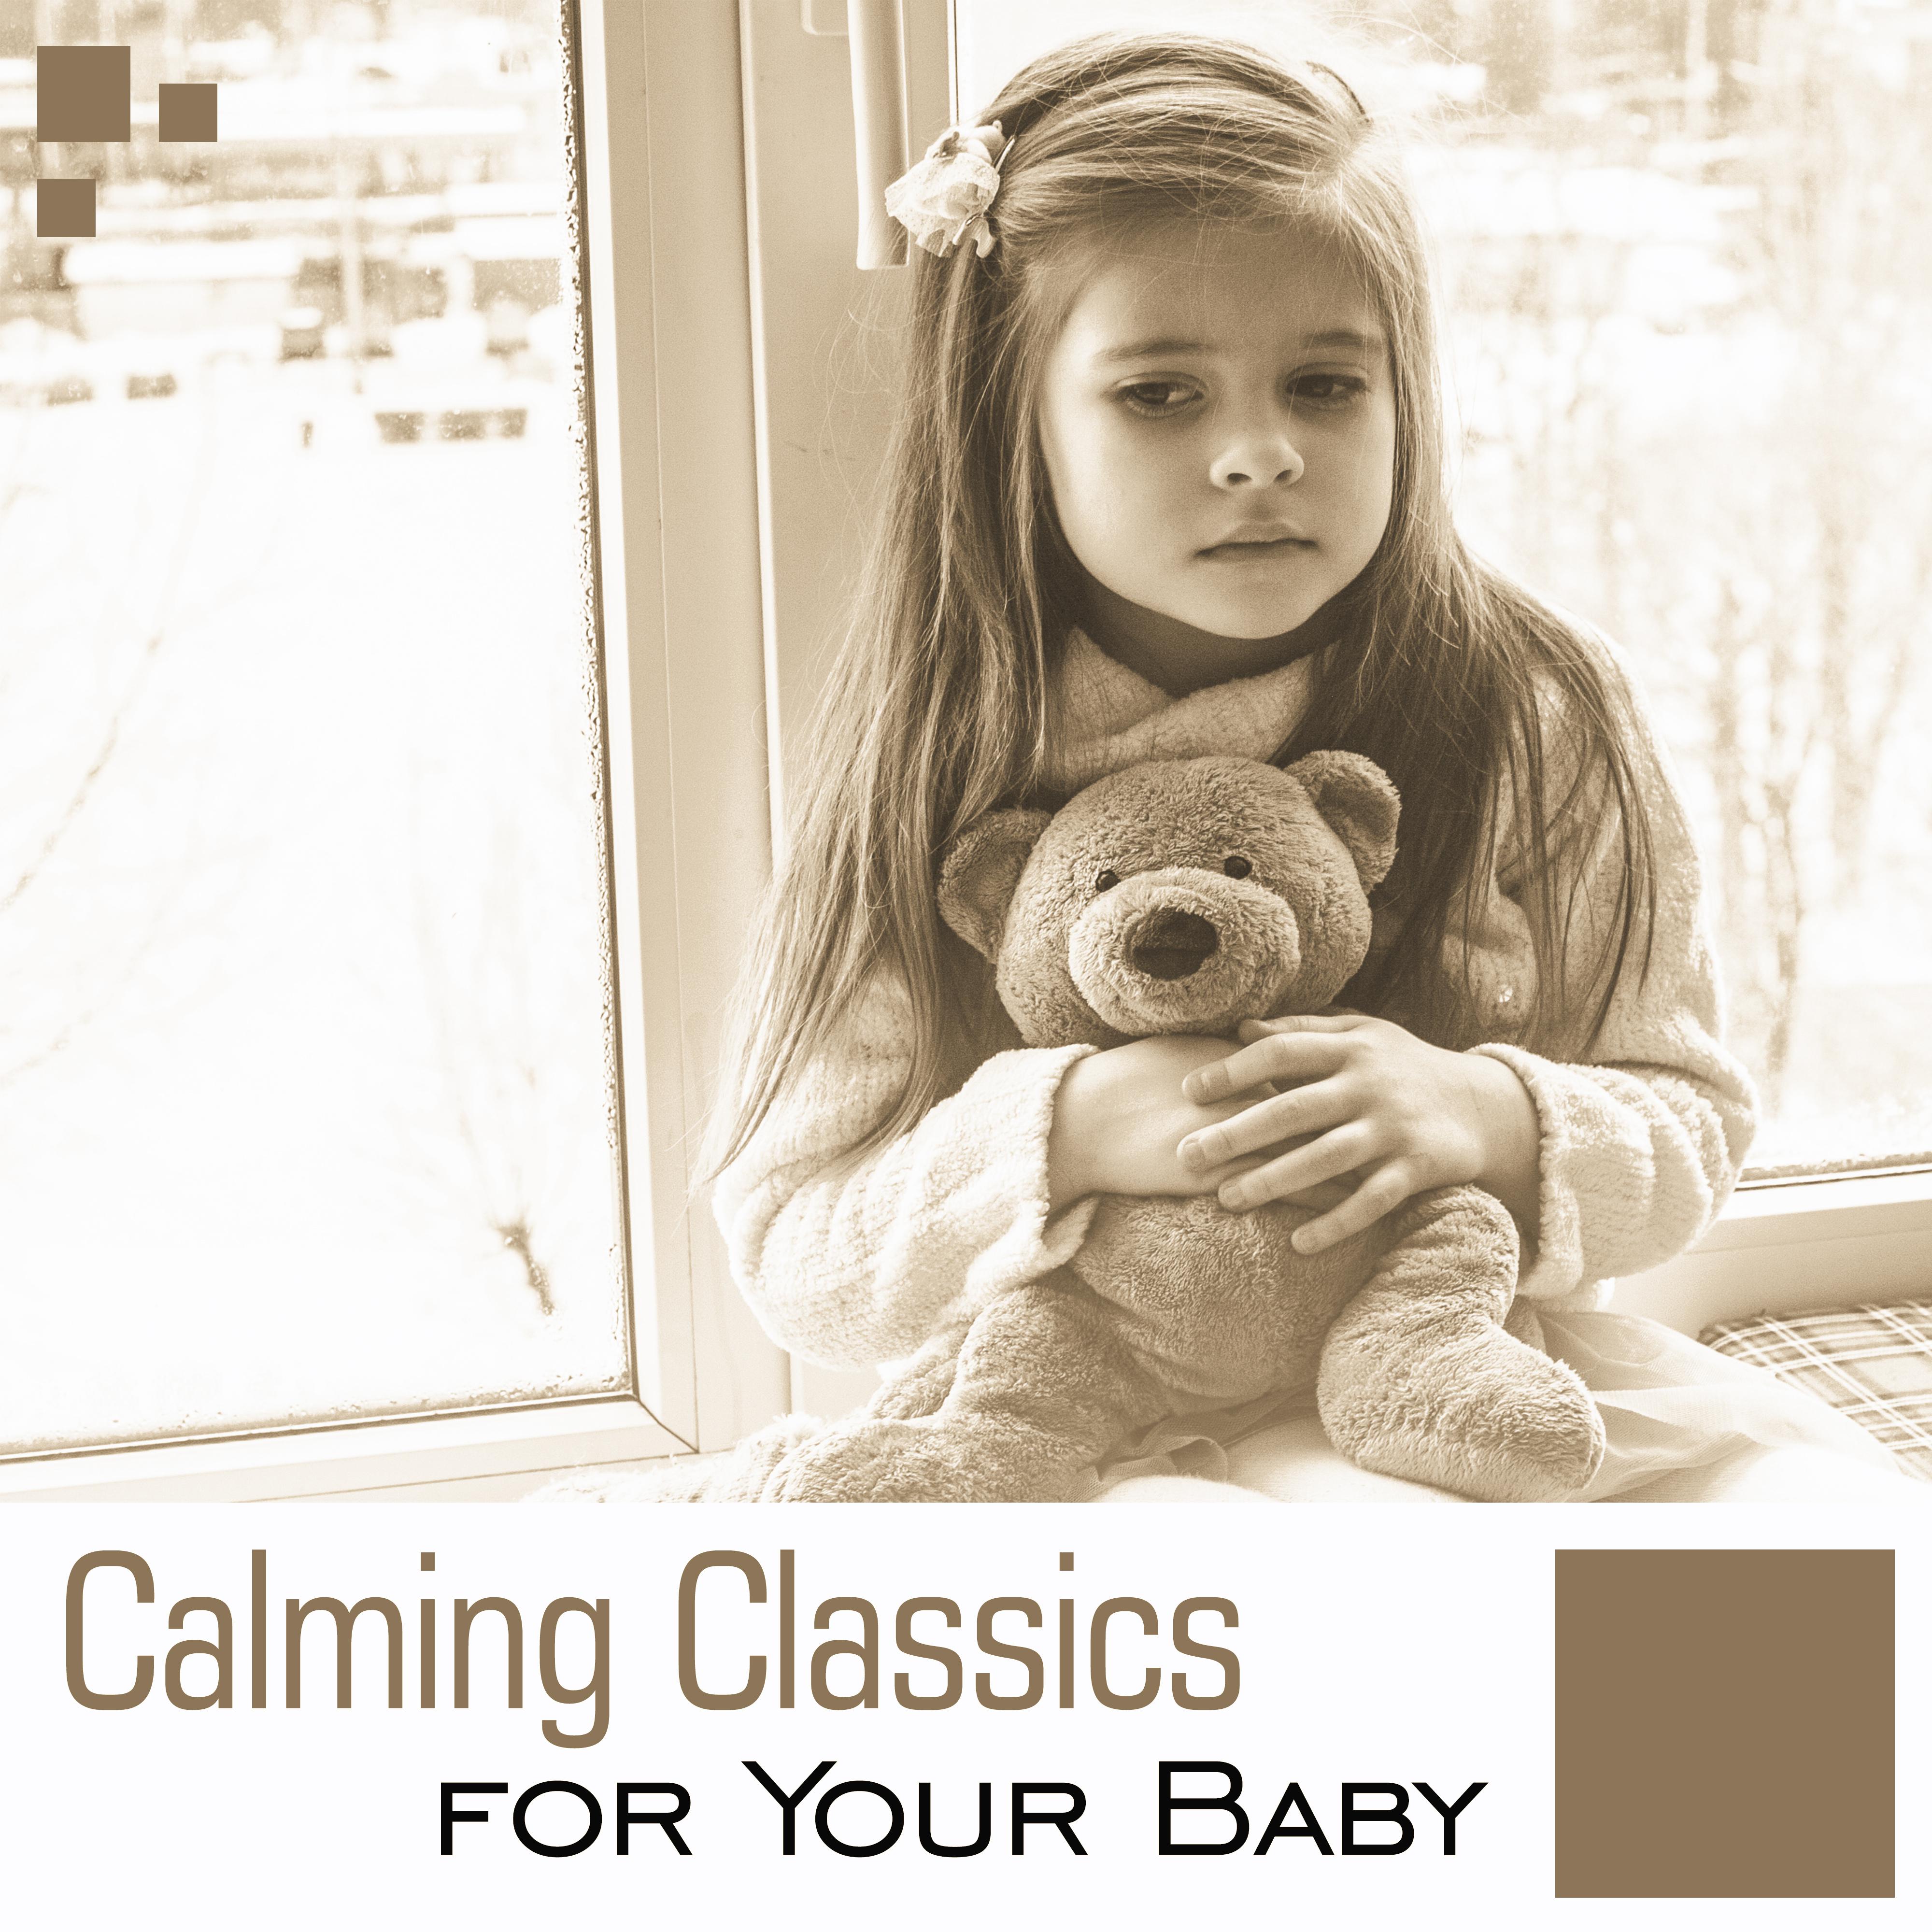 Calming Classics for Your Baby  Soothing Sounds to Relax, Stop Crying, Music for Babies, Calm Sleep